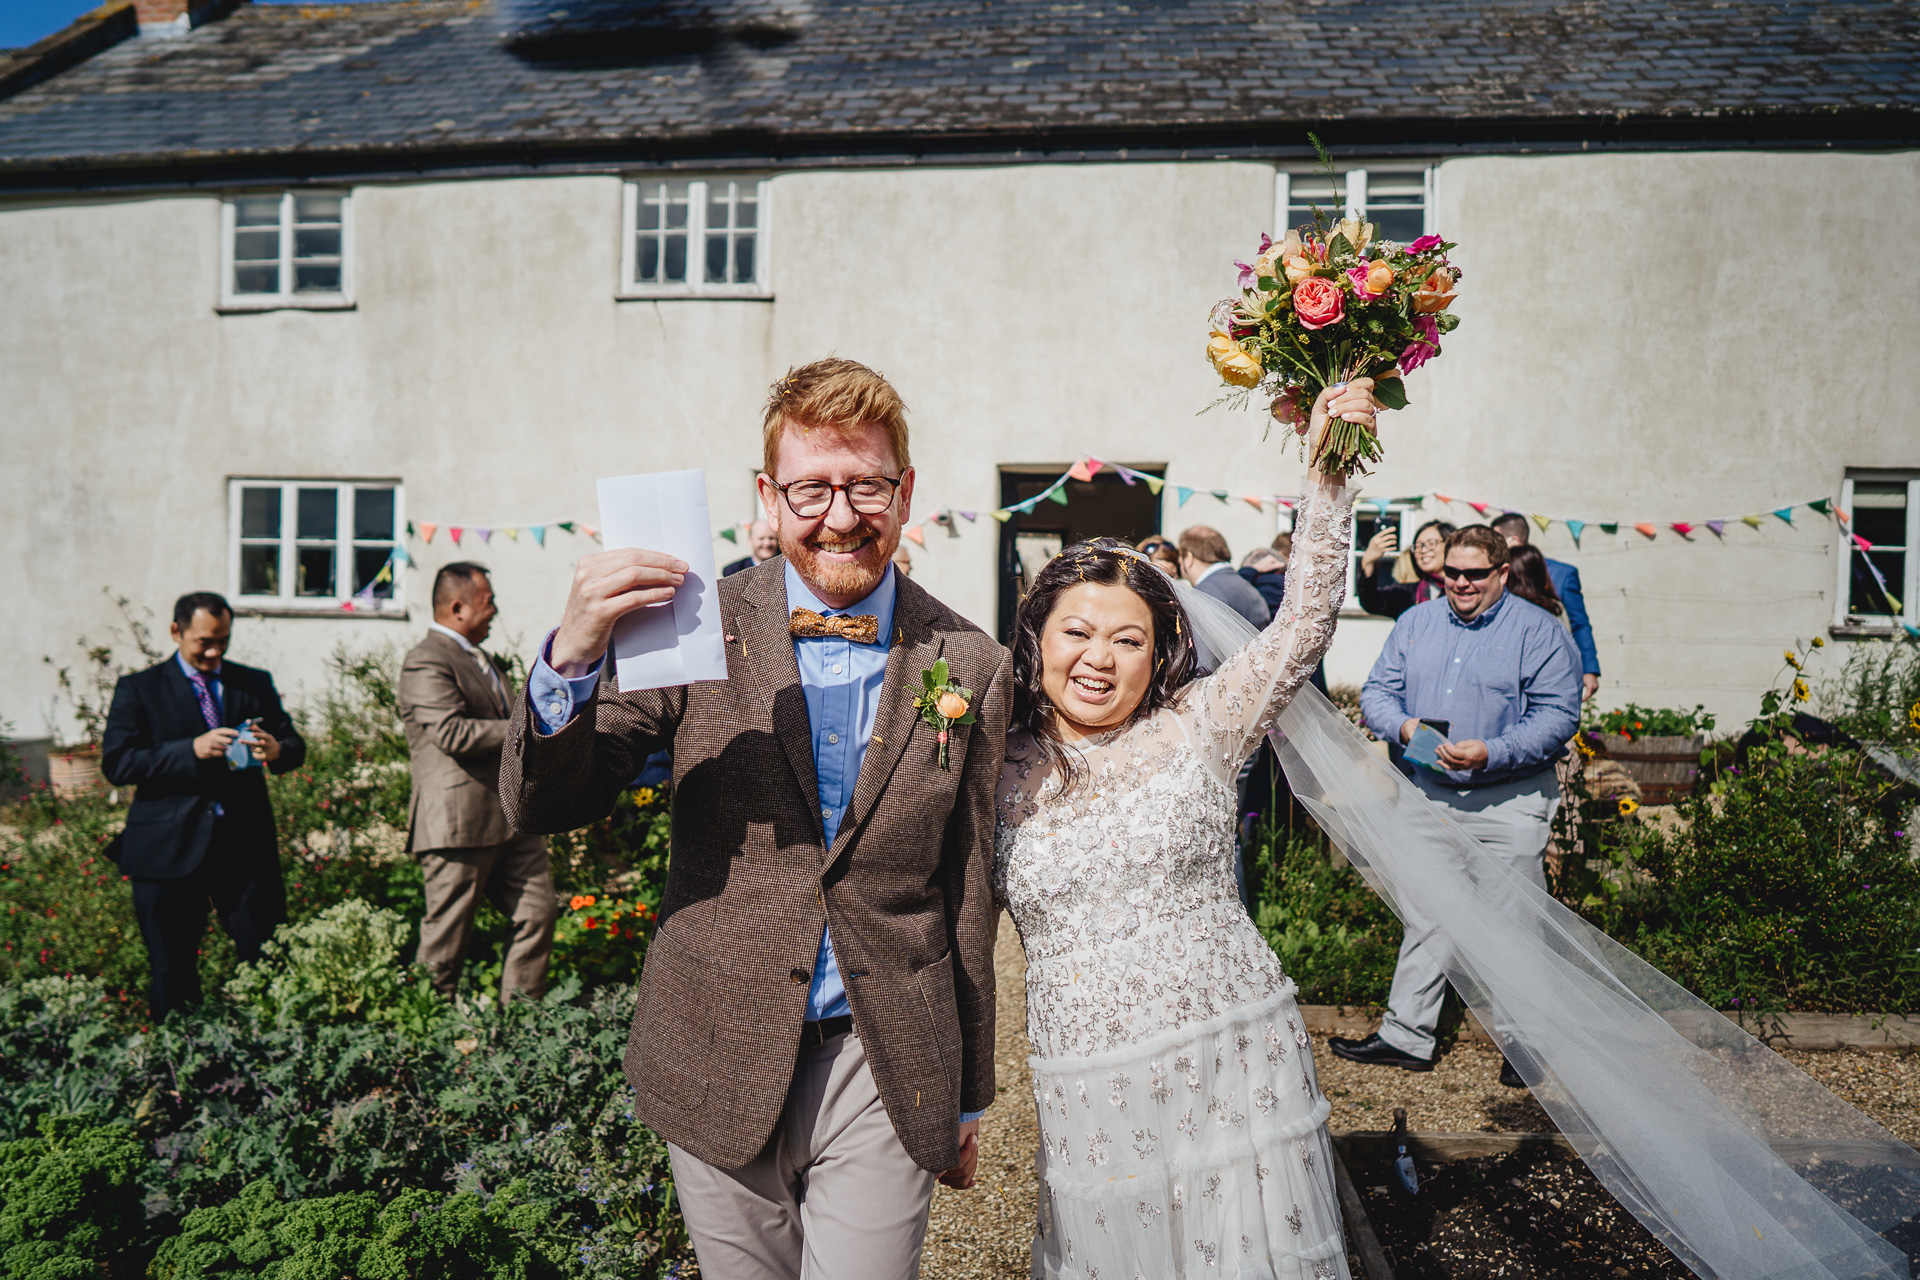 Bride and groom waving flowers and smiling after their outdoor wedding ceremony